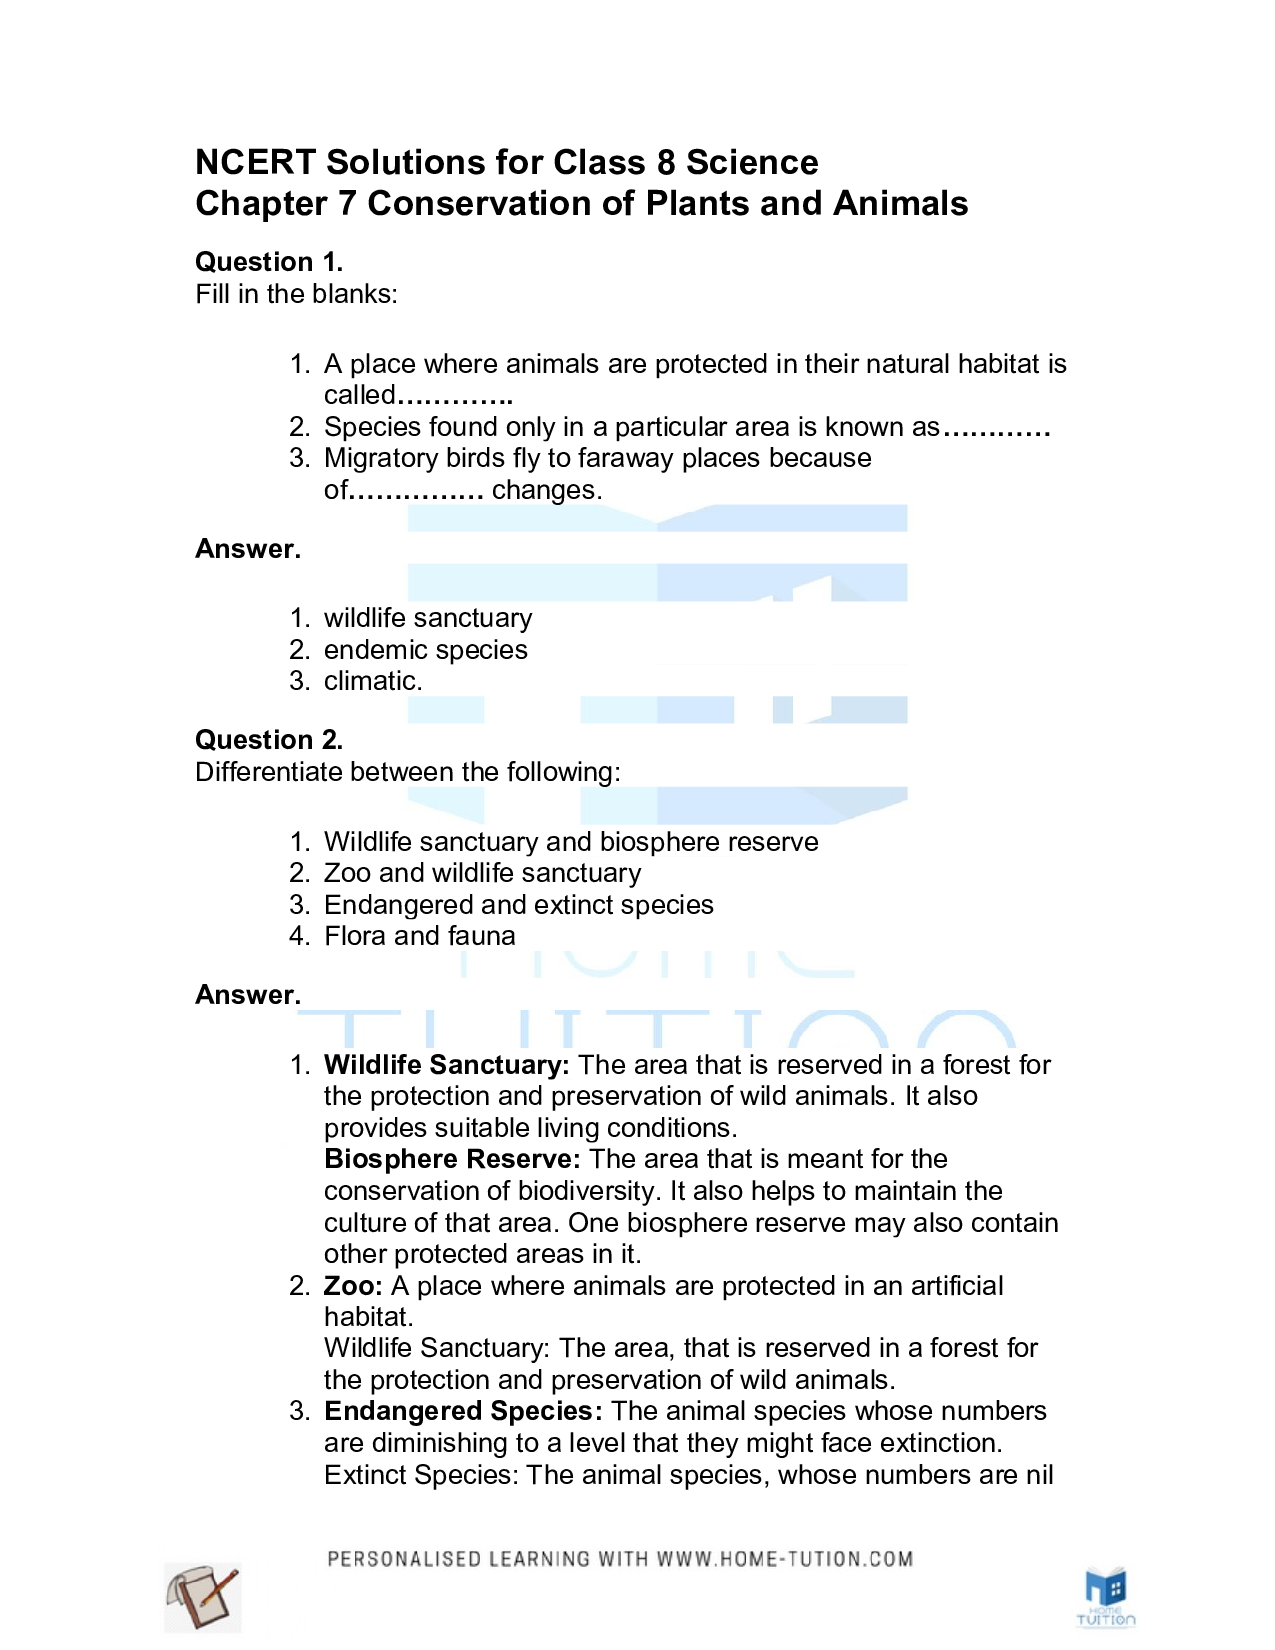 Class 8 Science Chapter 7 Conservation of Plants and Animals